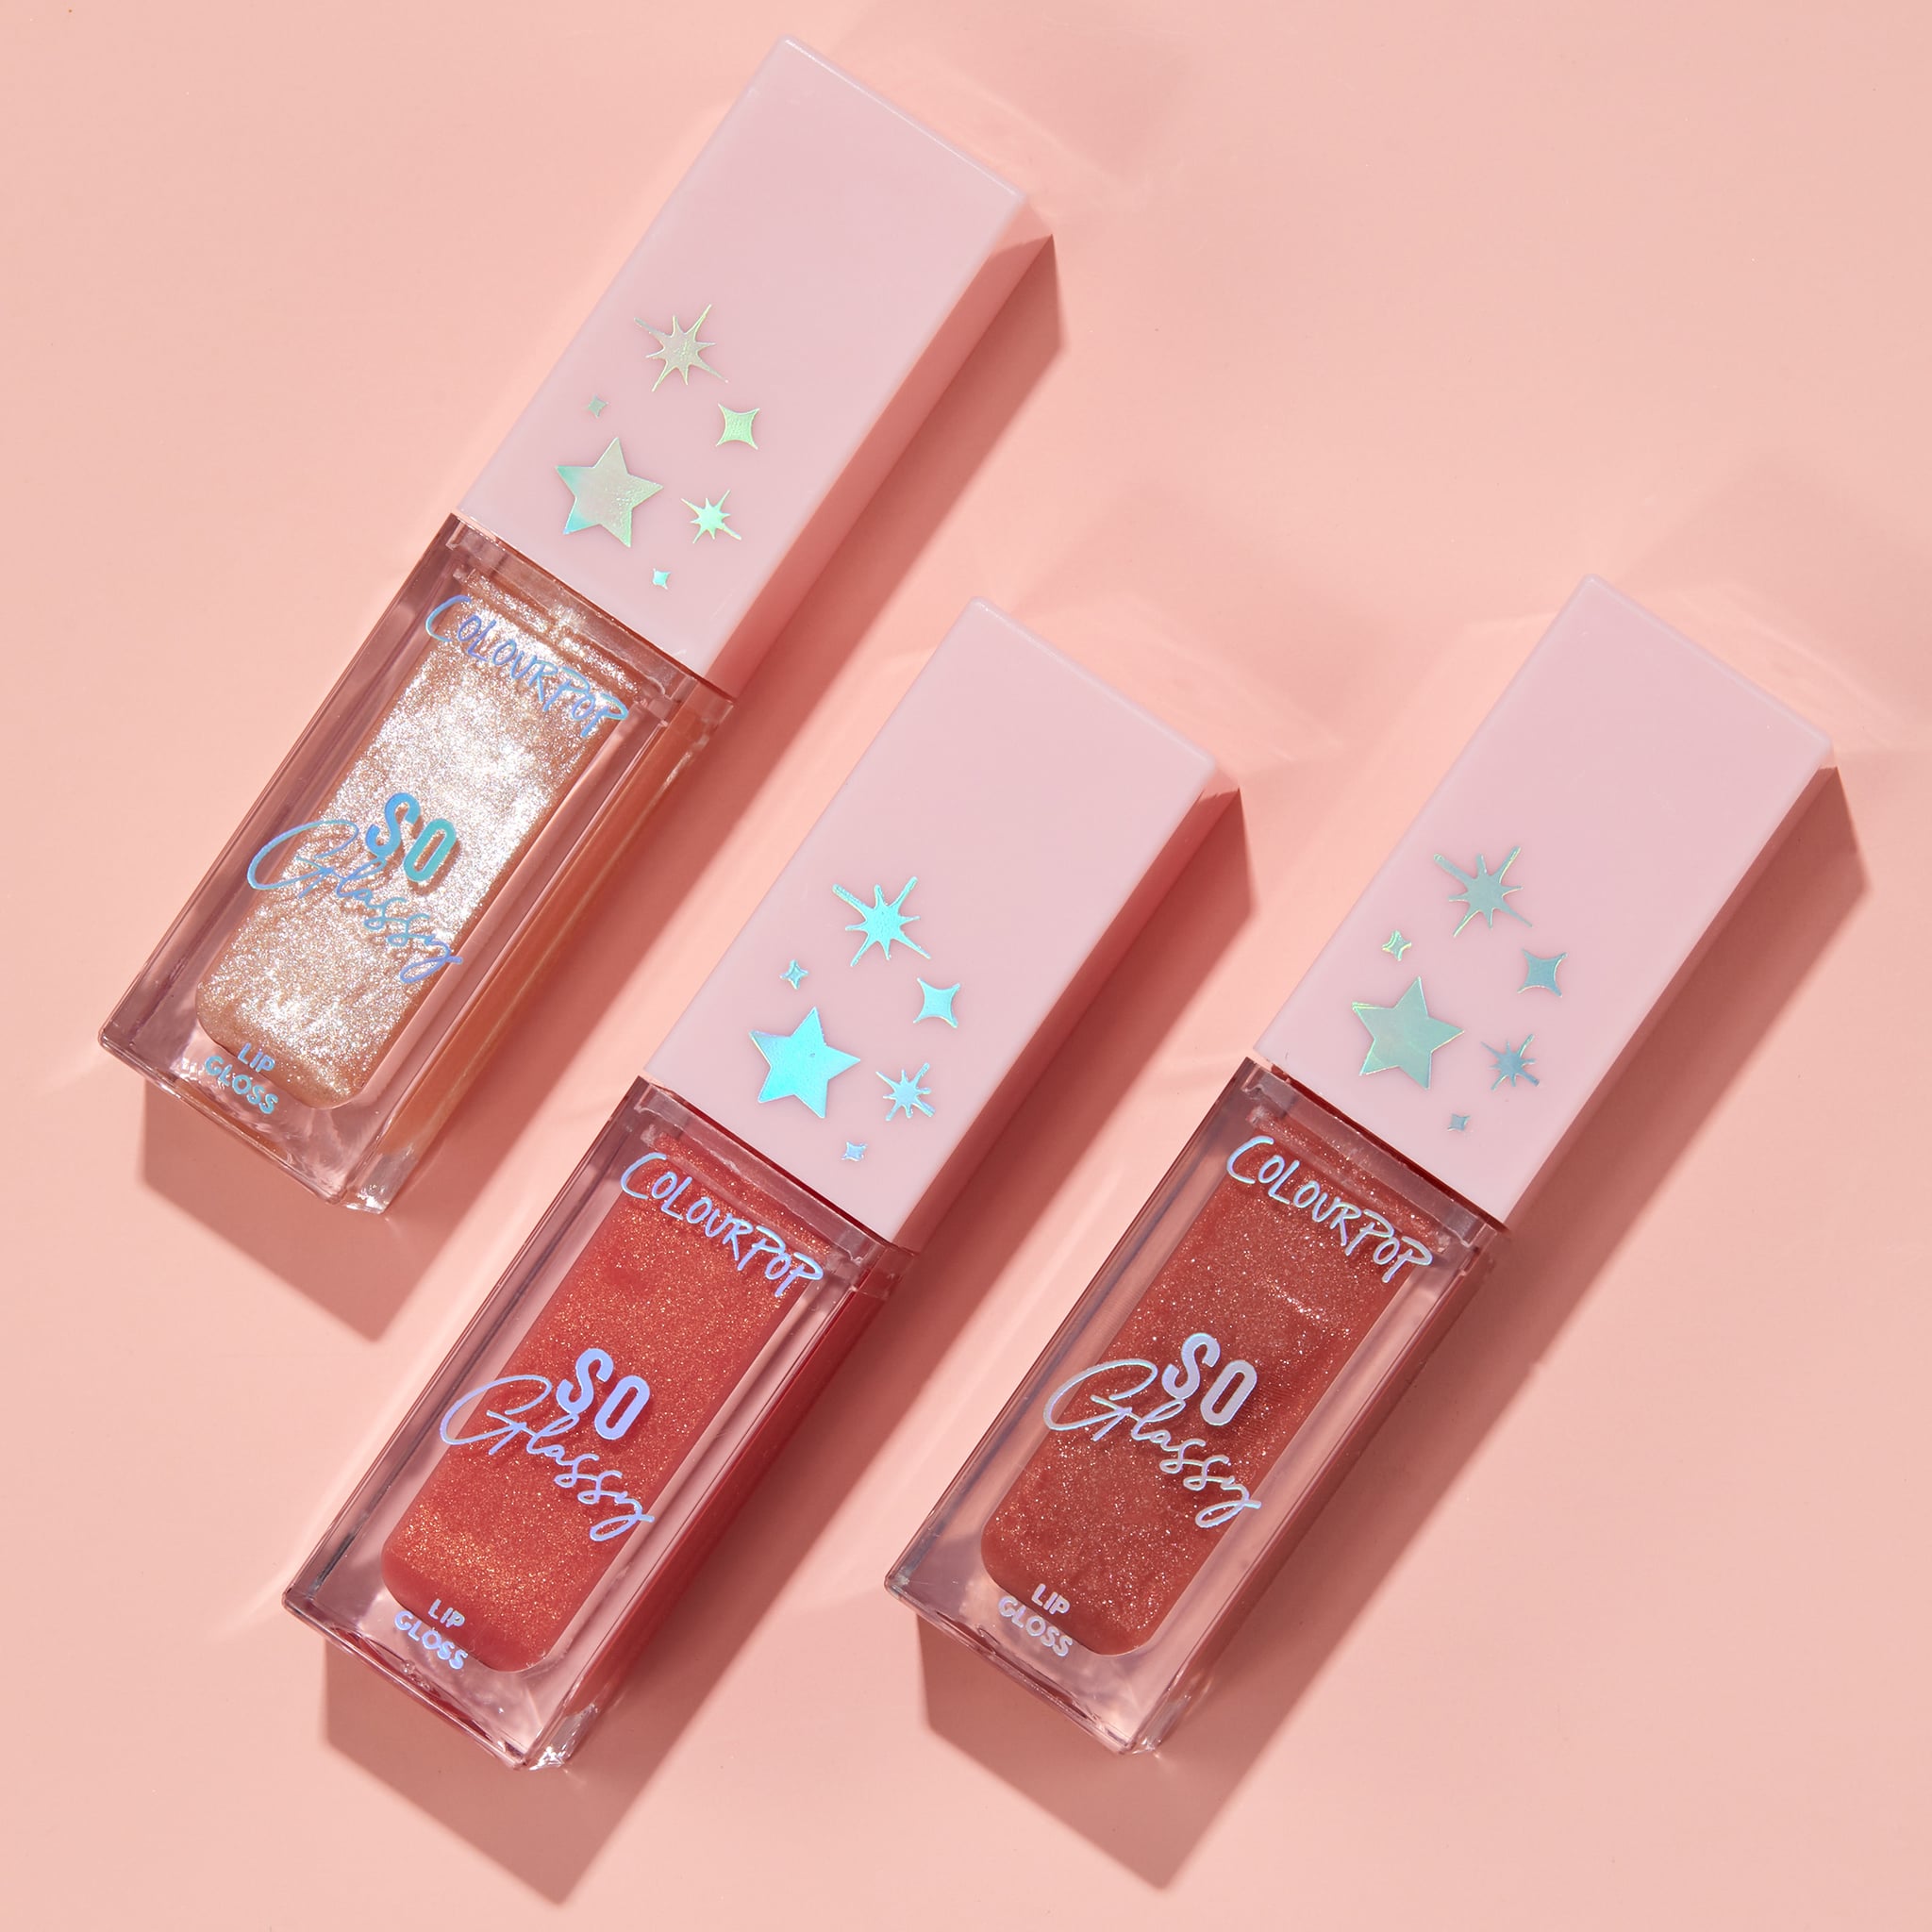 ColourPop for Target Has Officially Launched, and It's Stocked With Eye and  Lip Must-Haves